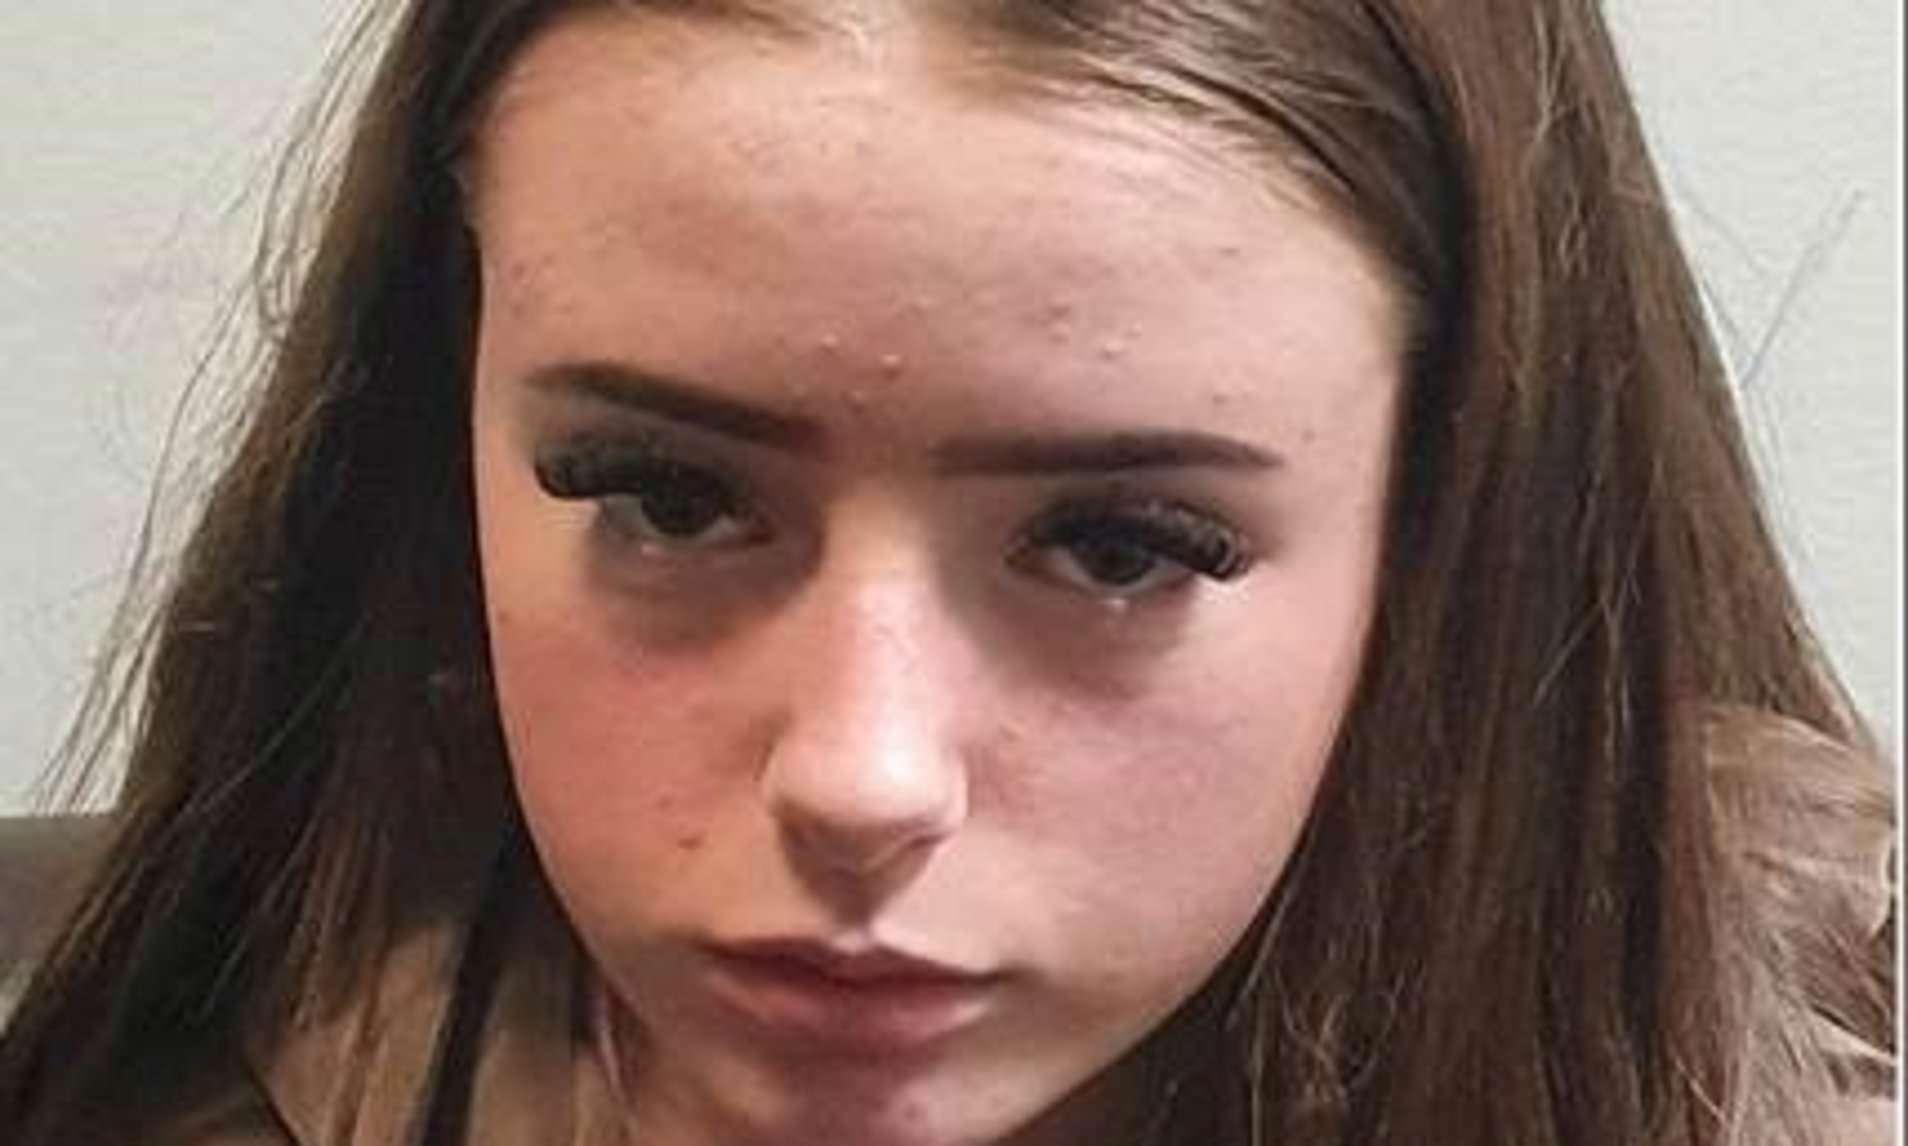 Find Sienna Police Launch Urgent Search For Missing 13 Year Old Schoolgirl From Dudley